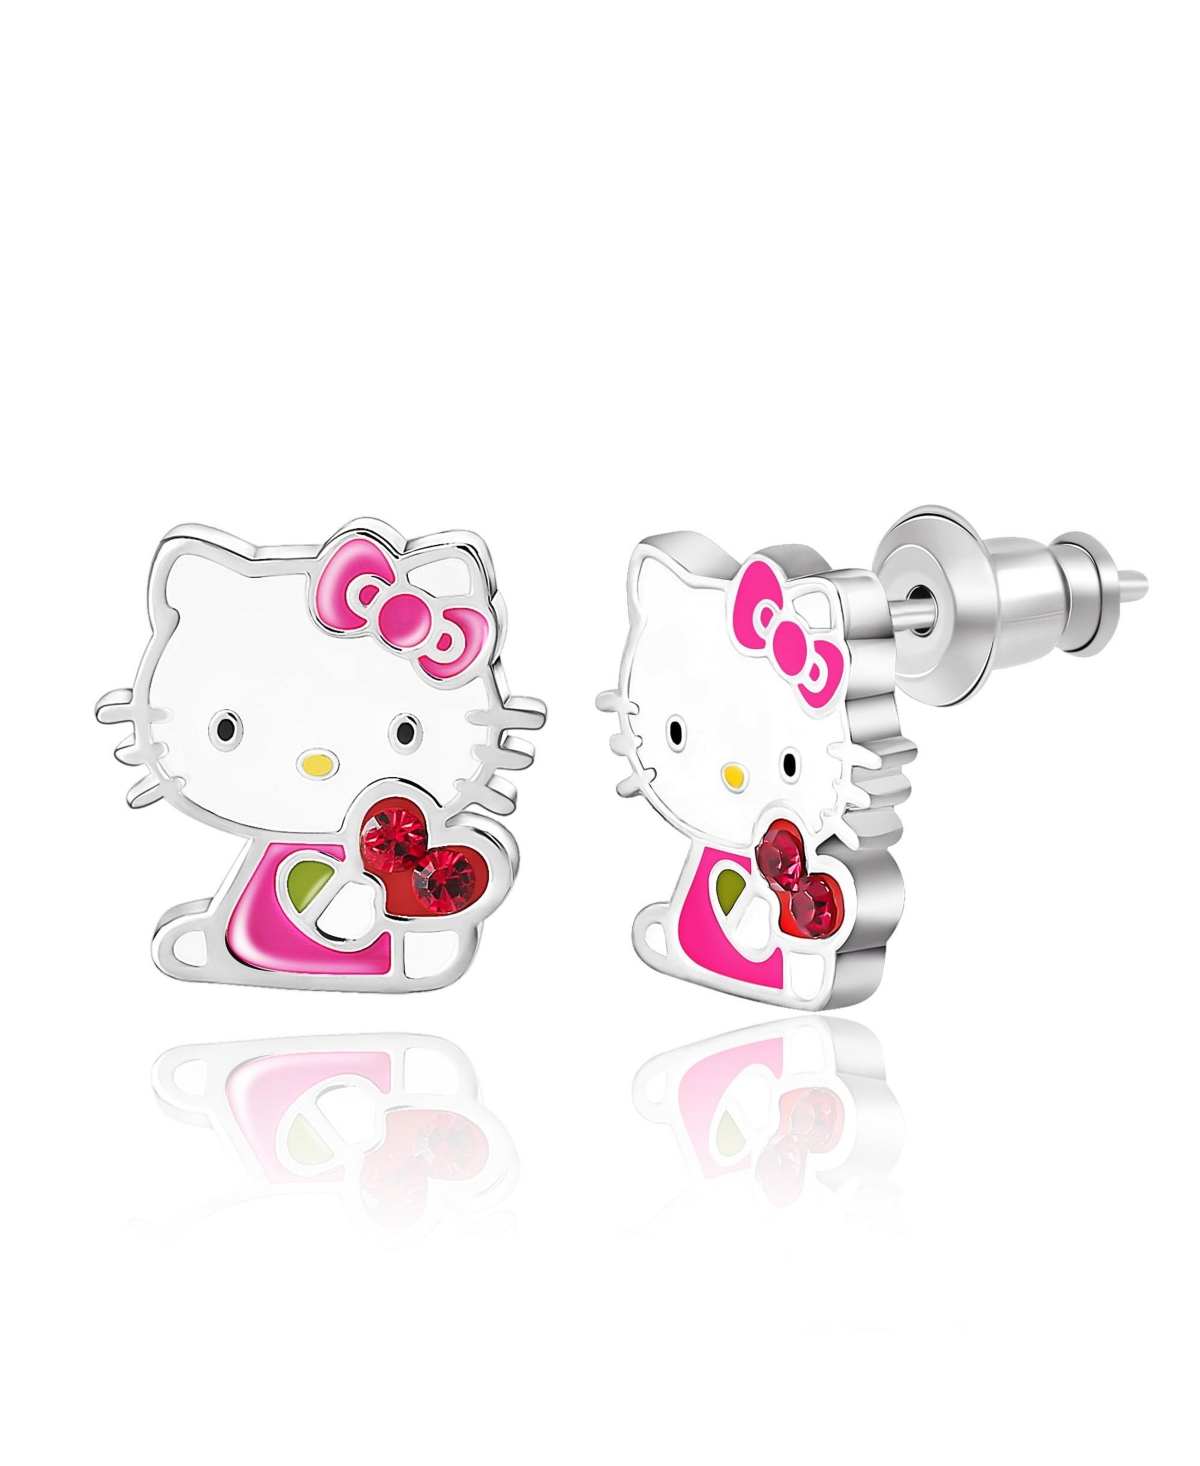 Sanrio Silver Plated Crystal Enamel Heart Stud Earrings, Officially Licensed Authentic - Dark red